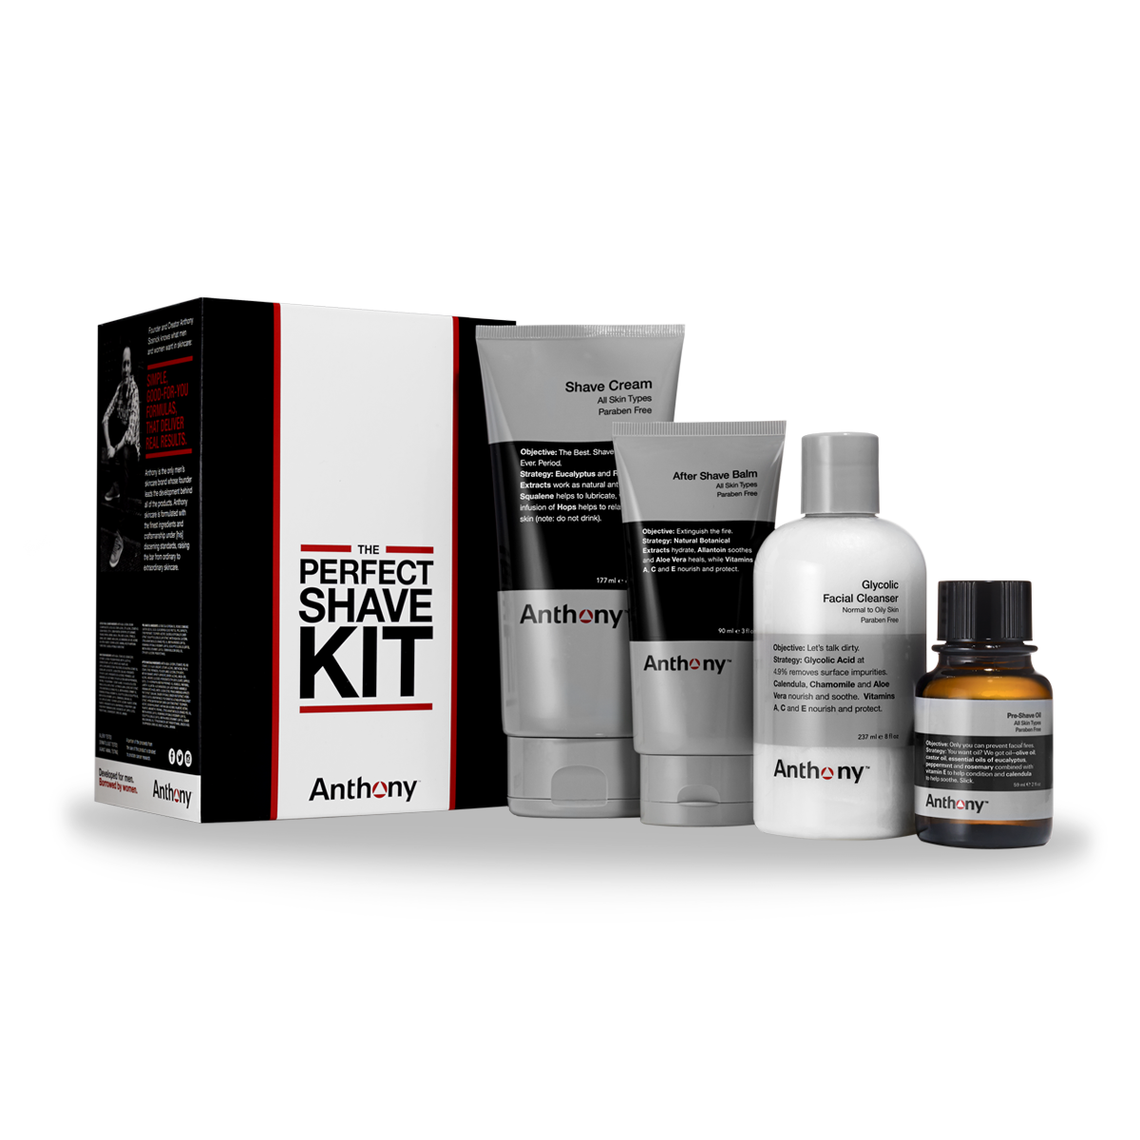  The perfect Shave Kit